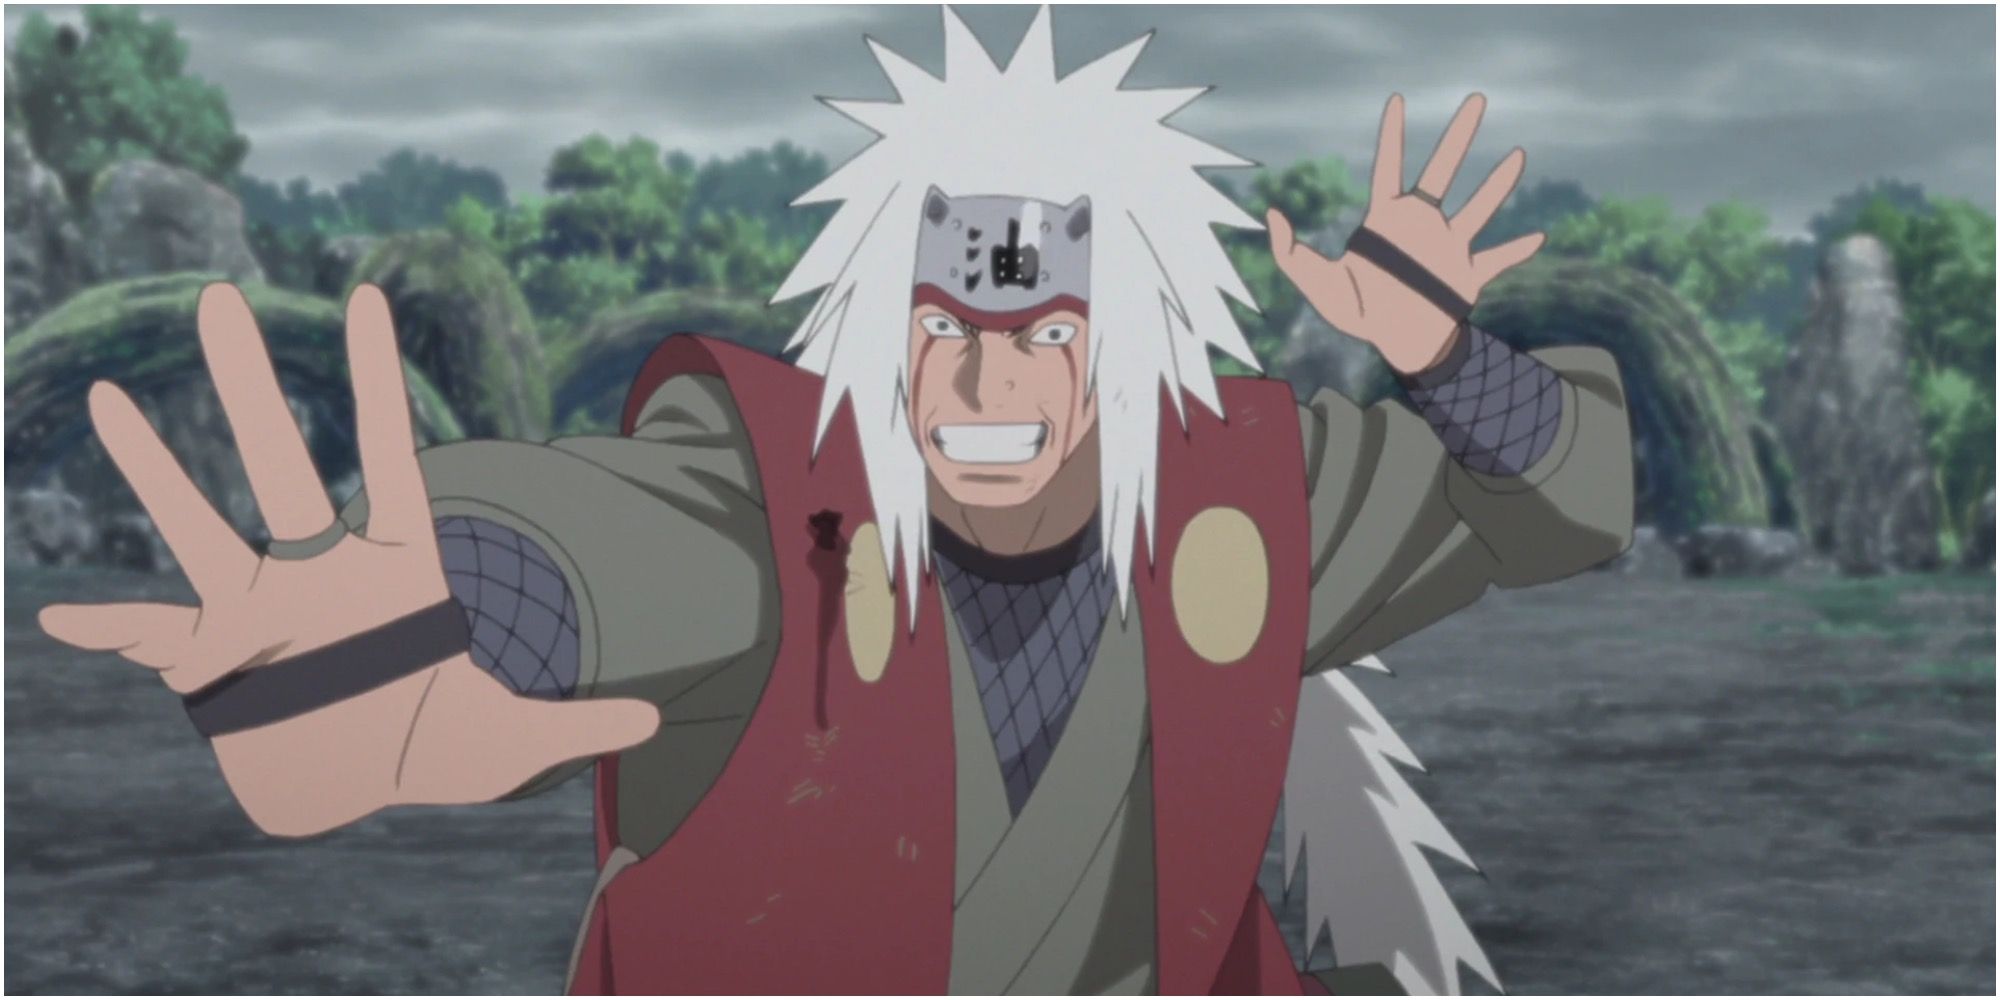 close-up of Jiraiya from Naruto holding his arms out preparing for battle